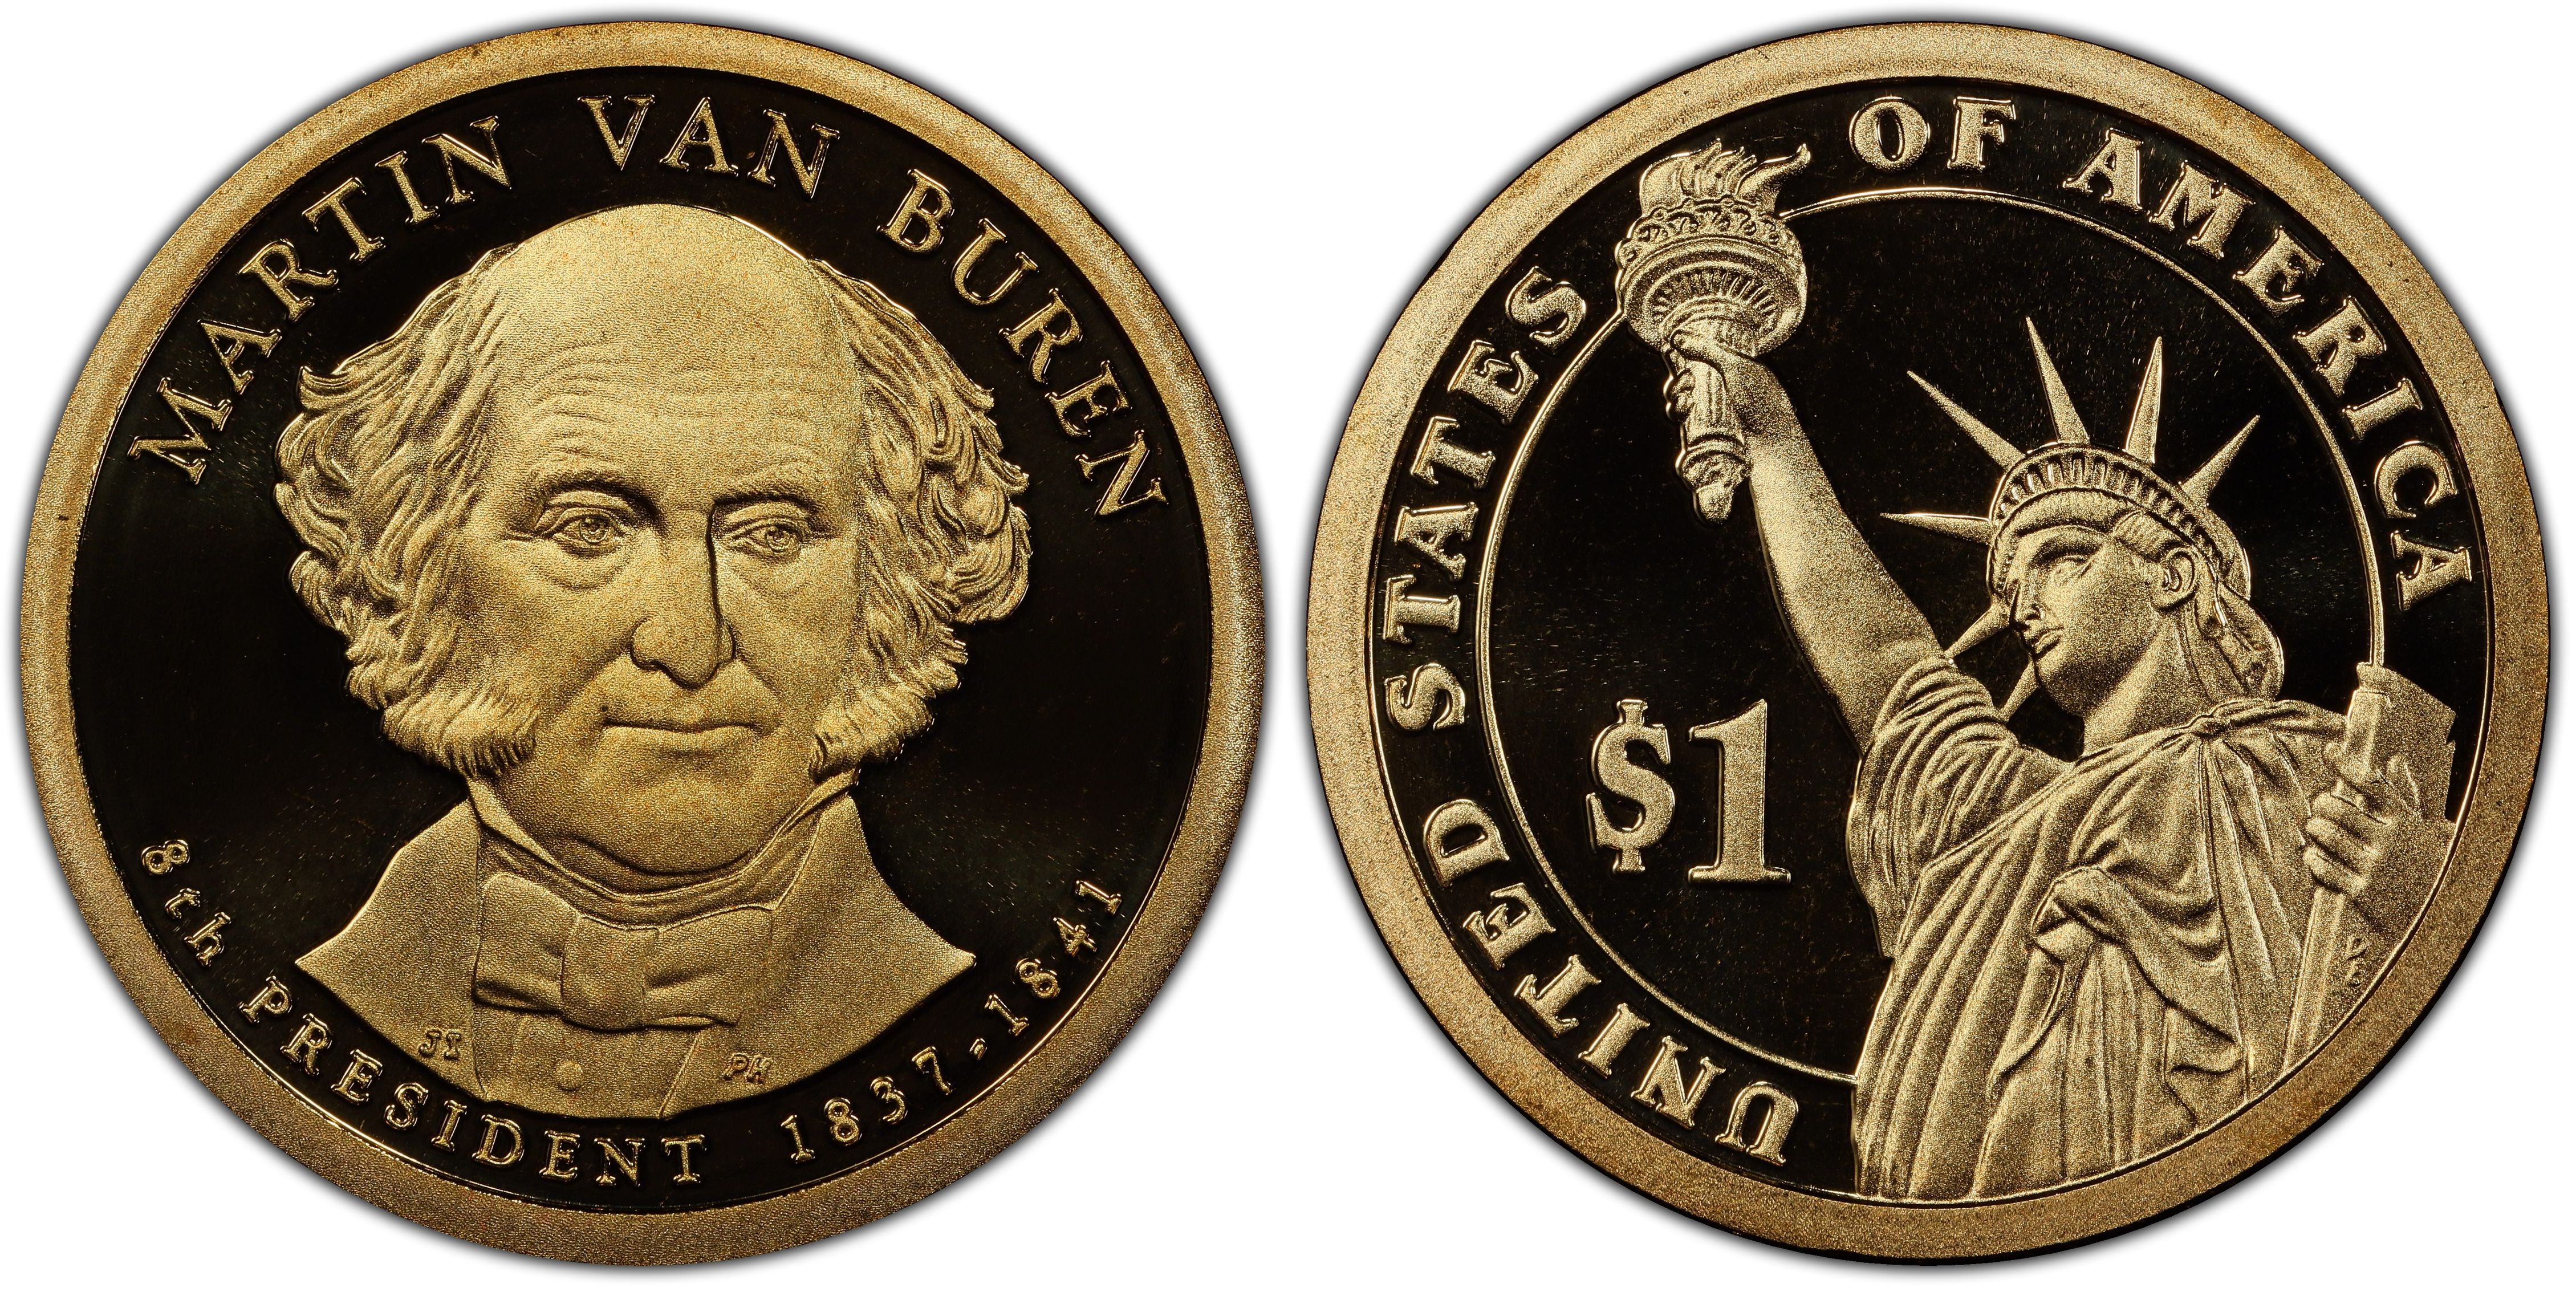 2008 Martin Van Buren Presidential Coin BU/UNC $1 with Biography and 2 Stamps 